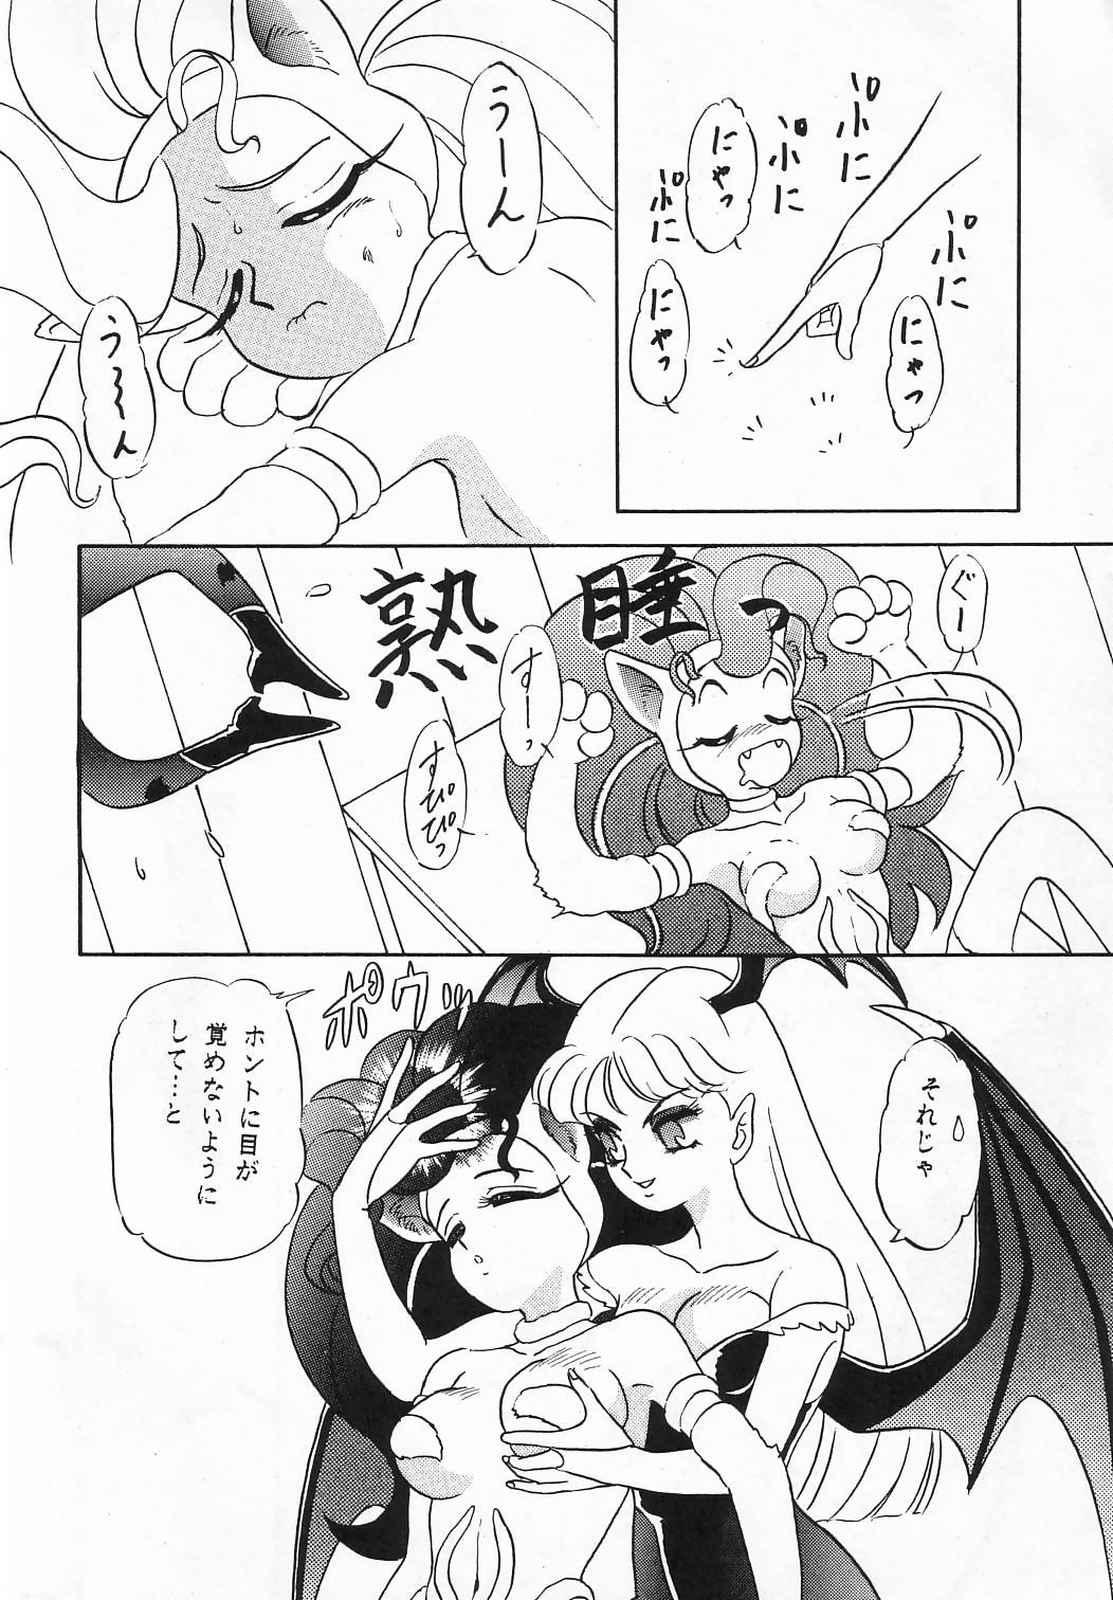 Tgirls Lunch Box 10 - Lunch Time 2 - Sailor moon Darkstalkers Gang - Page 8